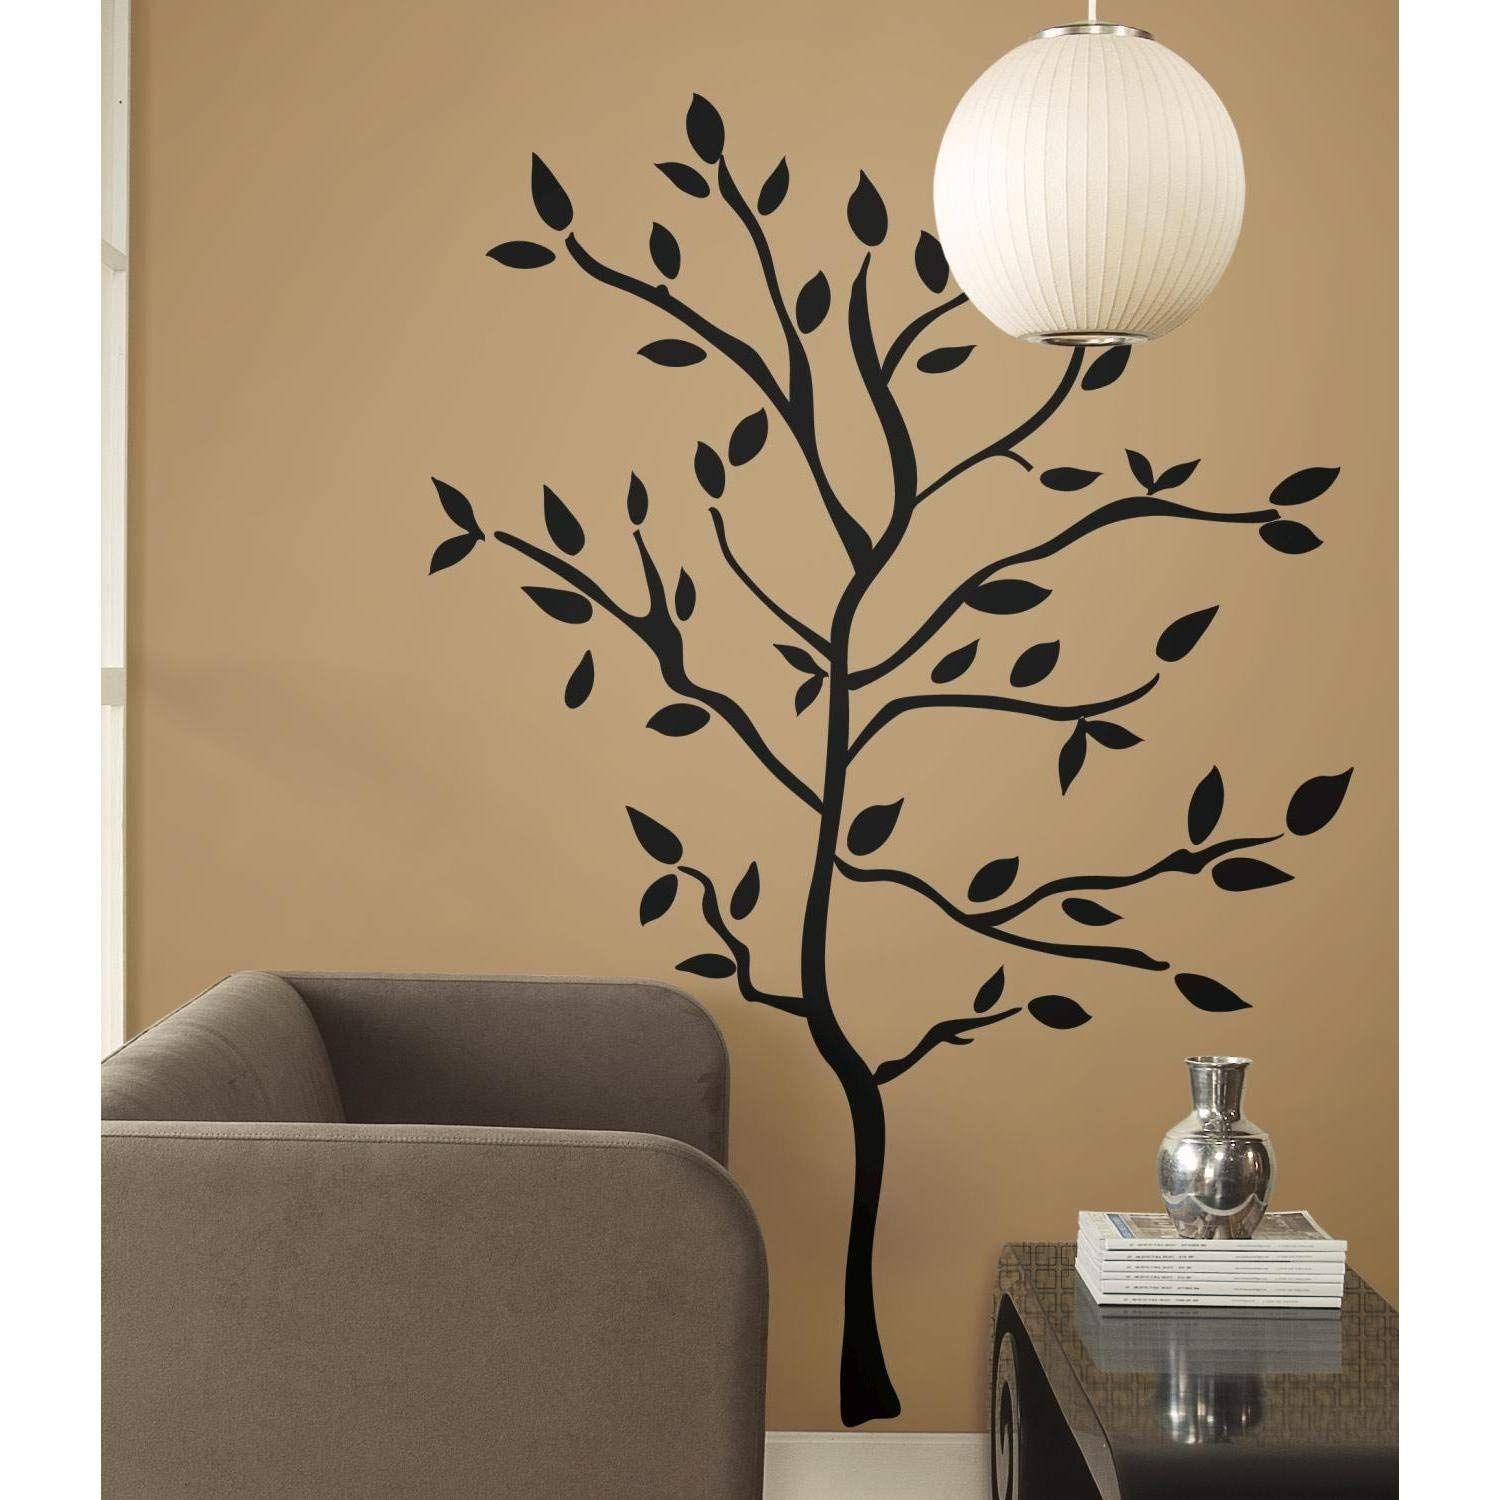 Roommates Rmk1317gm Tree Branches Peel & Stick Wall Decals – Wall For Wall Sticker Art (View 8 of 20)